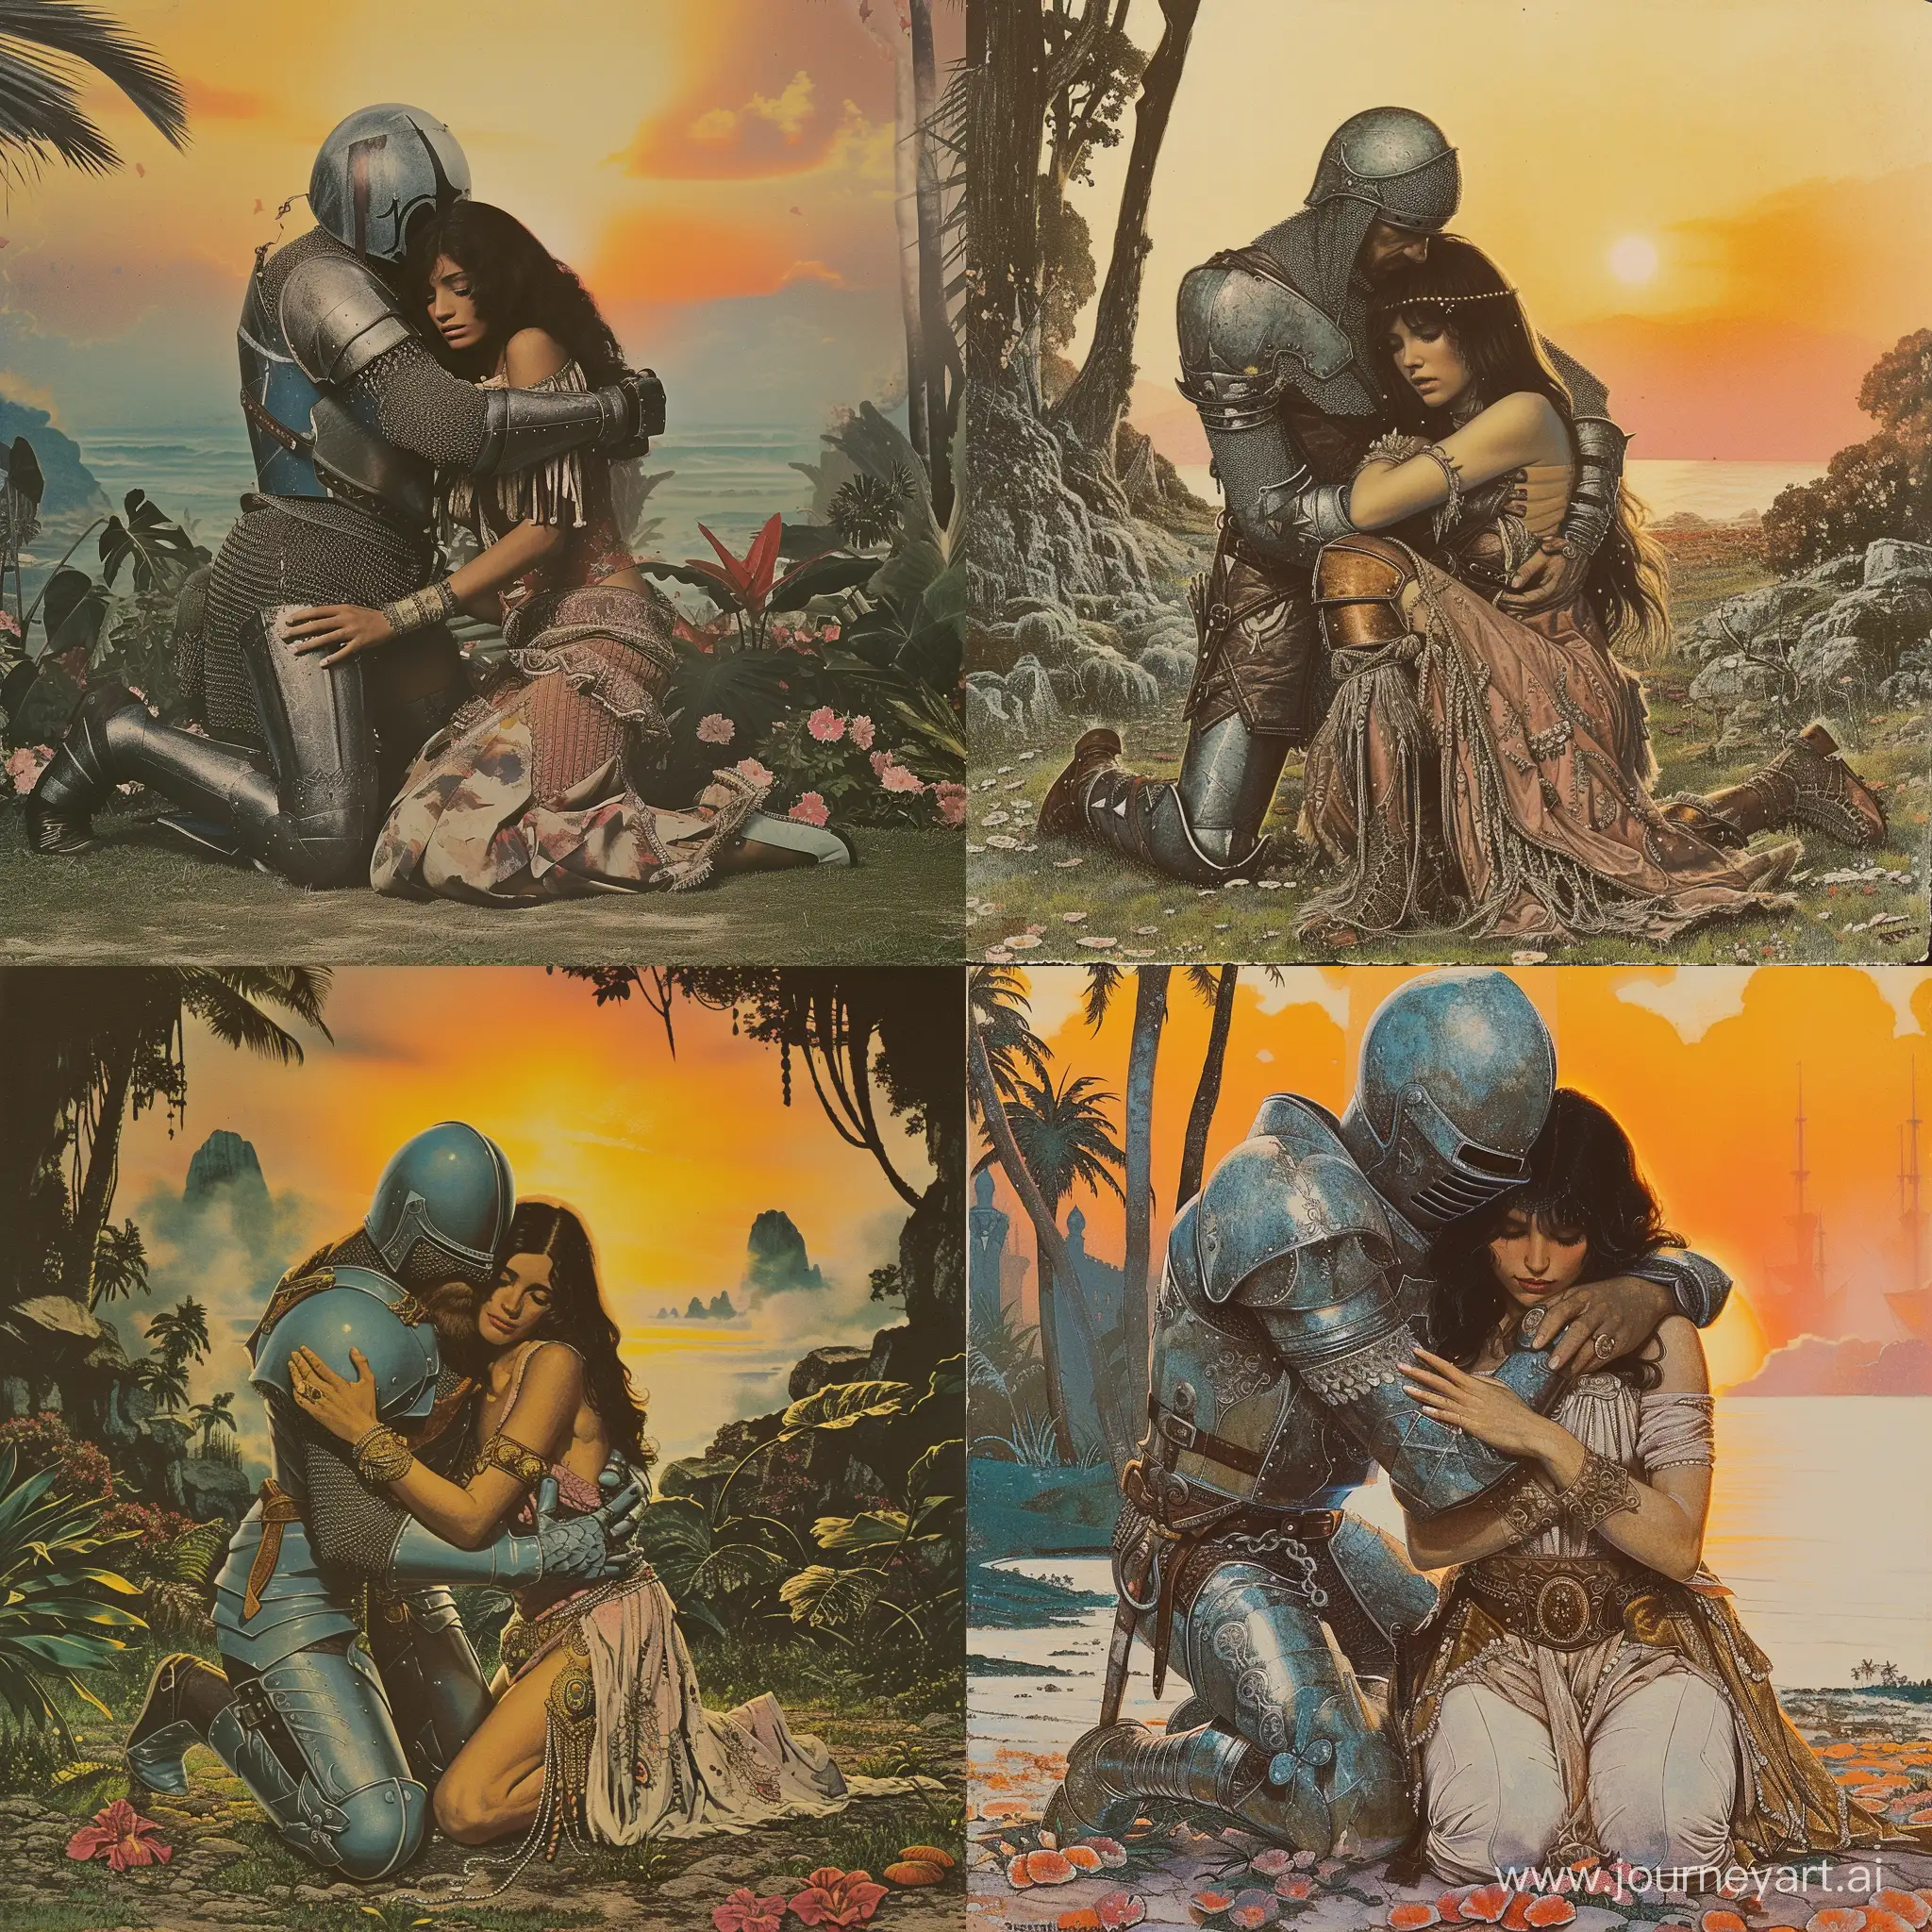 a knight on knees hugging a pretty woman wearing a bohemian attire, the woman is sitting, in a paradise, sunrise in the background, 1970's dark fantasy style, gritty, detailed